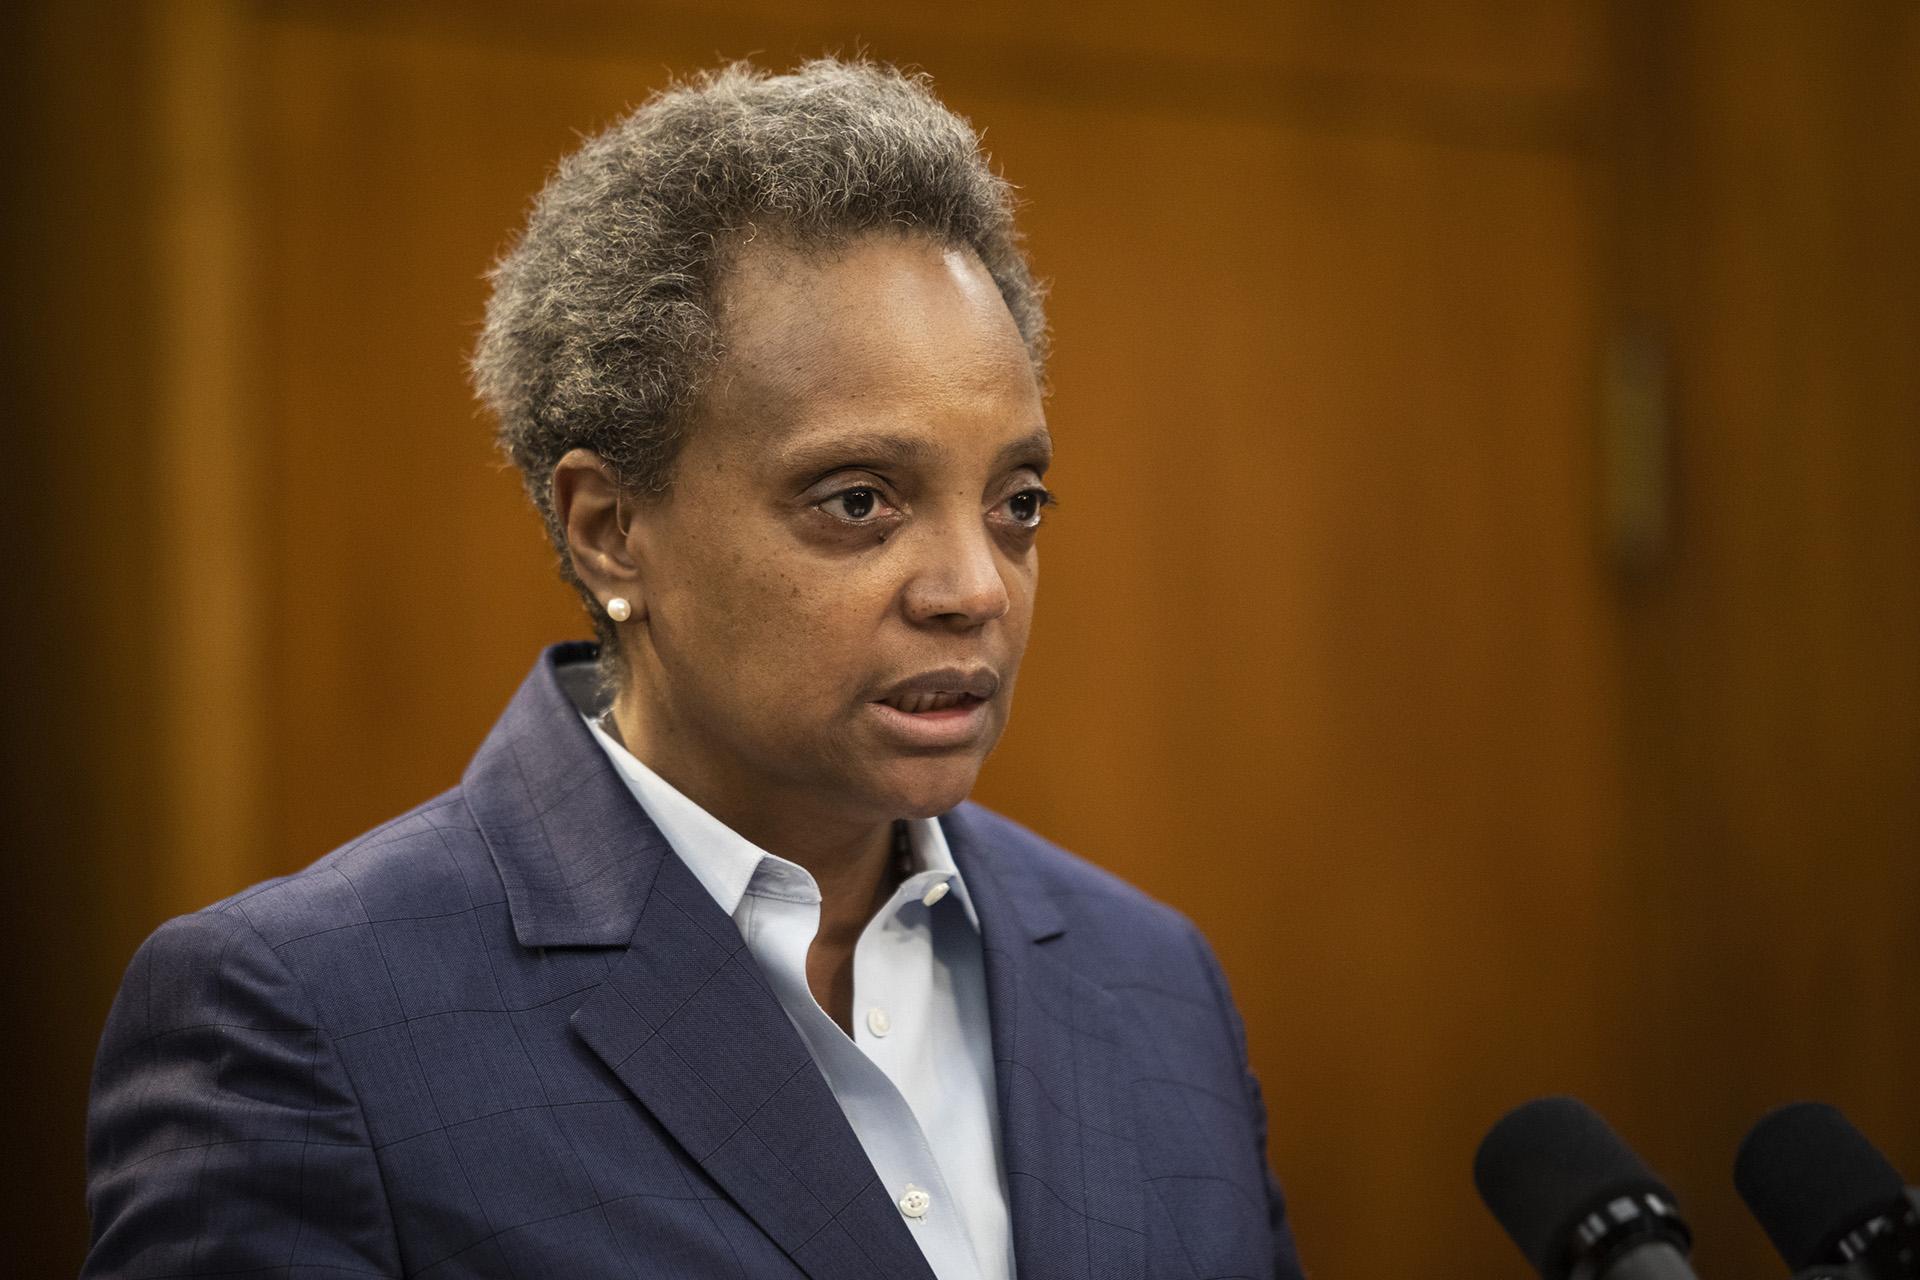 Mayor Lori Lightfoot speaks during a press conference at City Hall to announce the firing of Chicago Police Supt. Eddie Johnson, Monday morning, Dec. 2, 2019. (Ashlee Rezin Garcia / Chicago Sun-Times via AP)